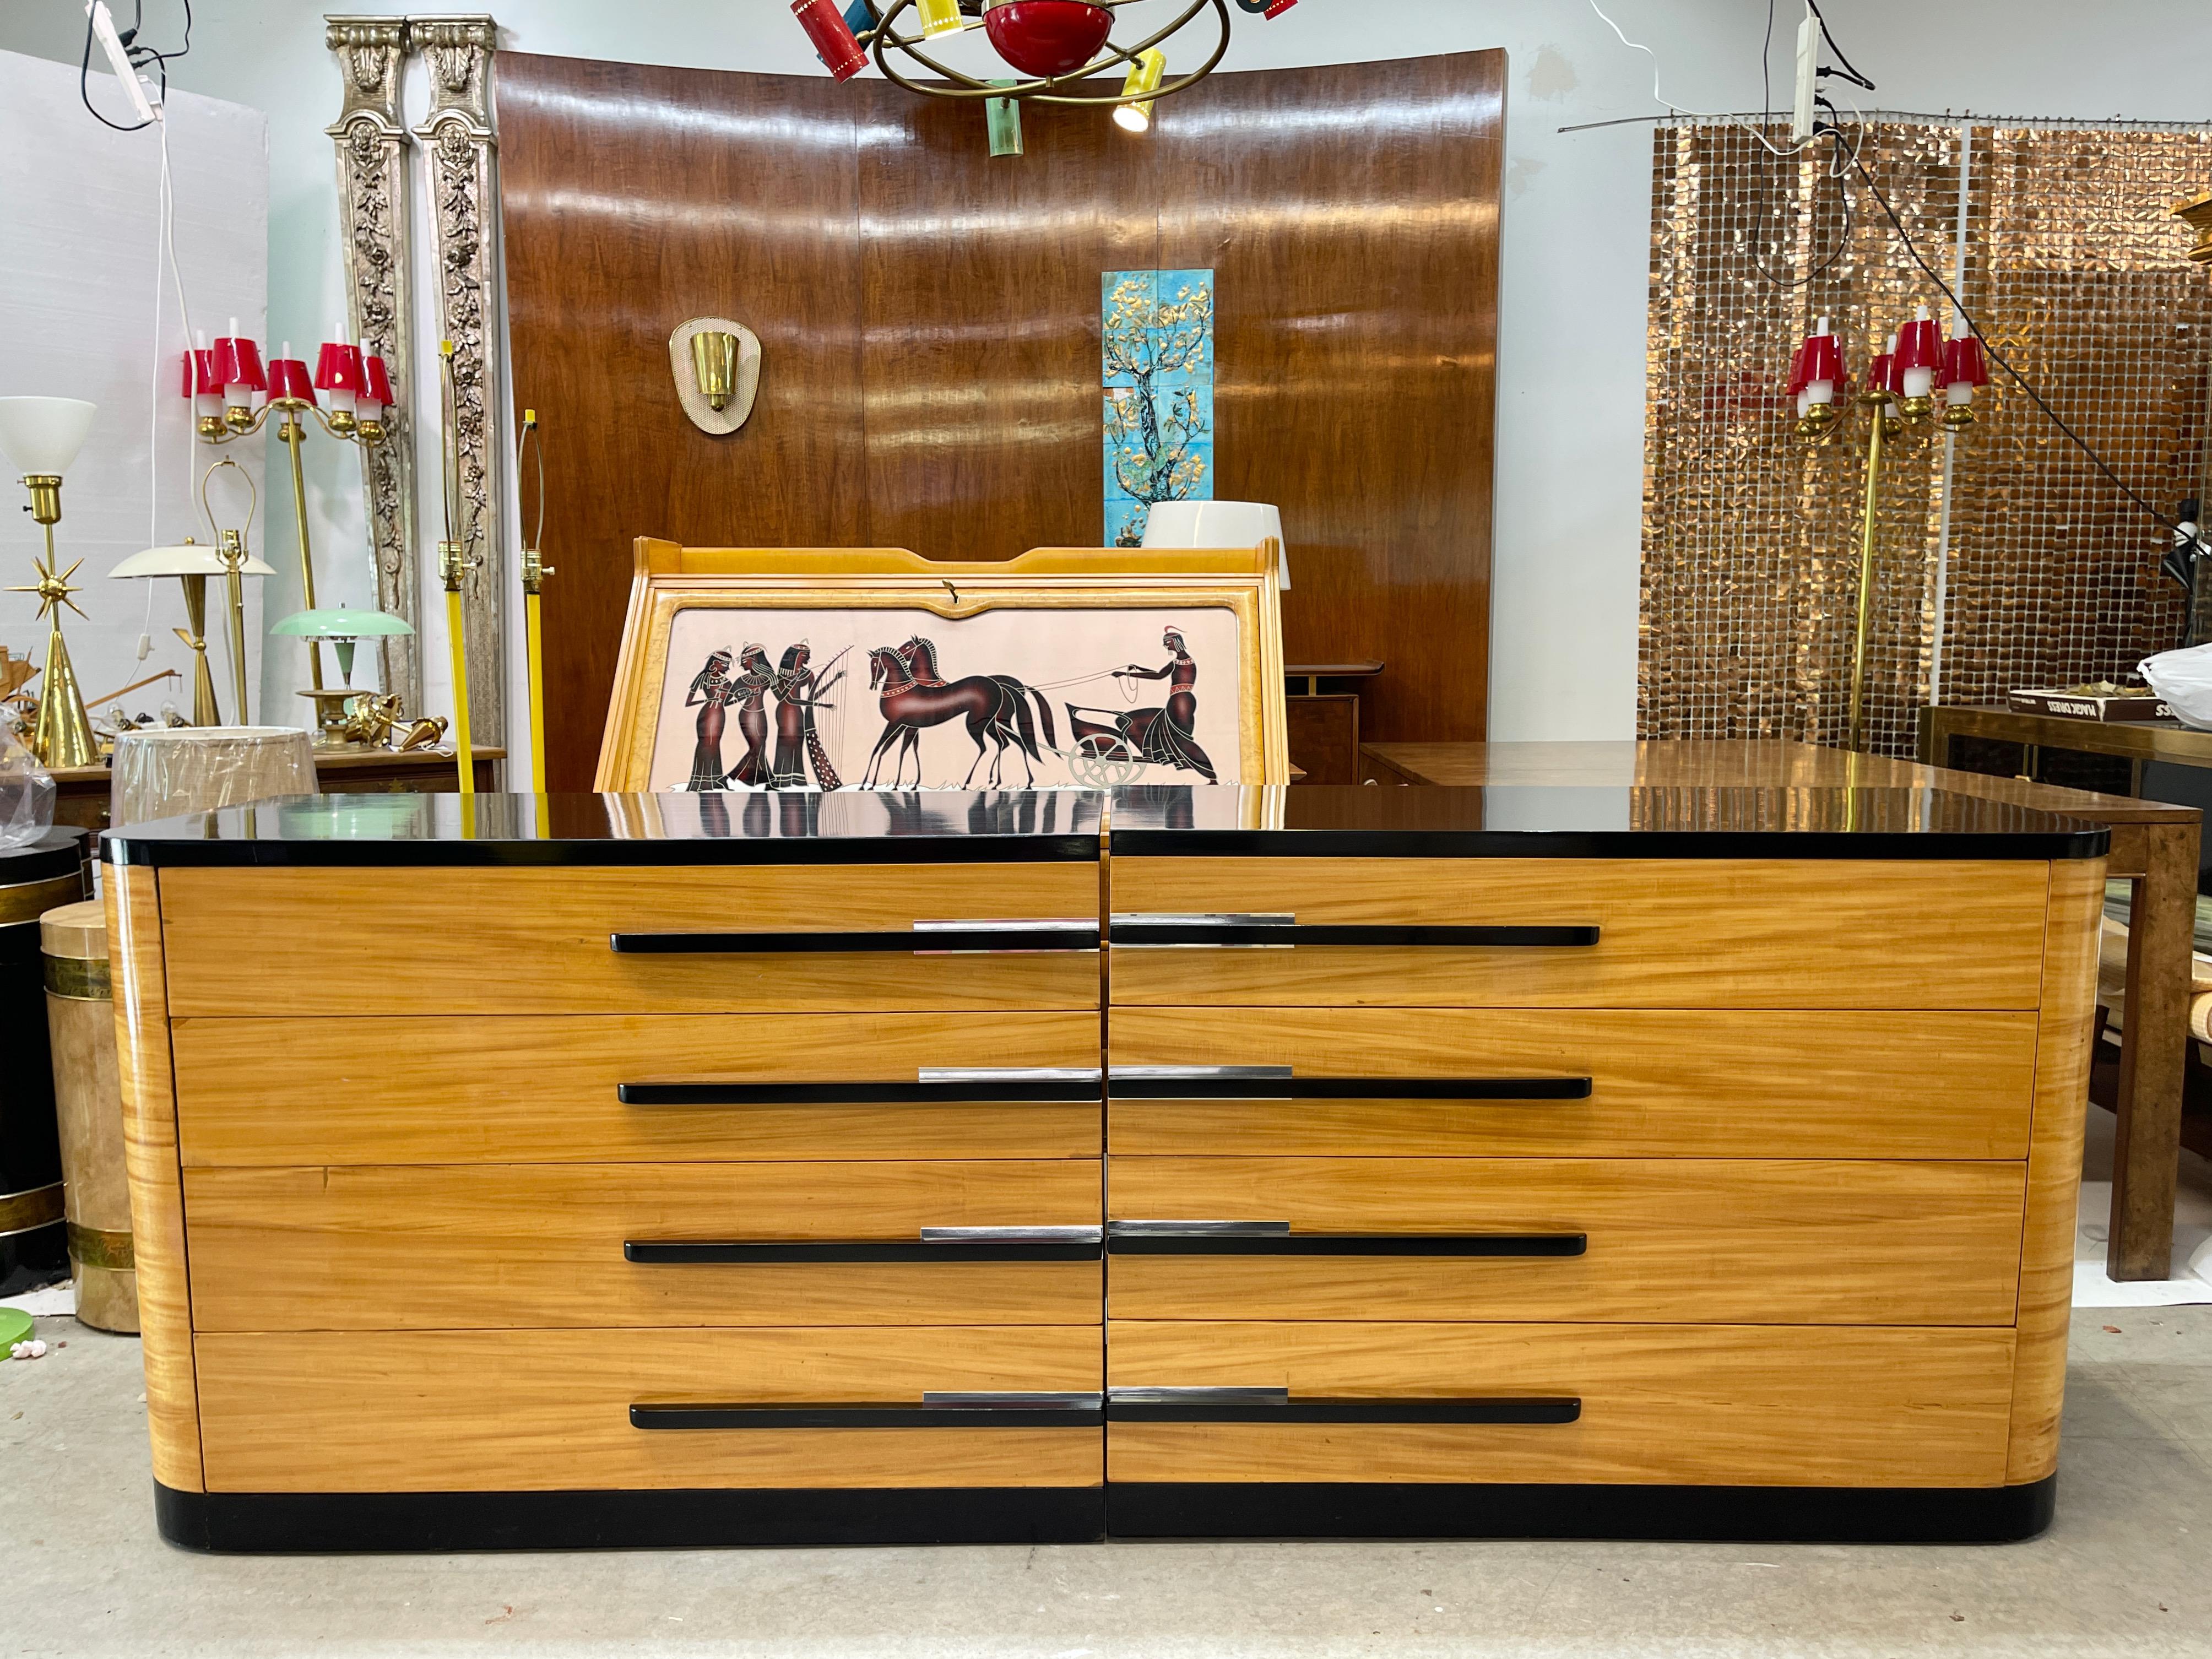 Pair of 1938 vintage American Modern streamline art deco chests of drawers designed by Leo Jiranek and possibly manufactured by J.B. Van Sciver Co. of Camden, NJ. Unsigned.
The design is bookended as each chest has a corresponding rounded vertical